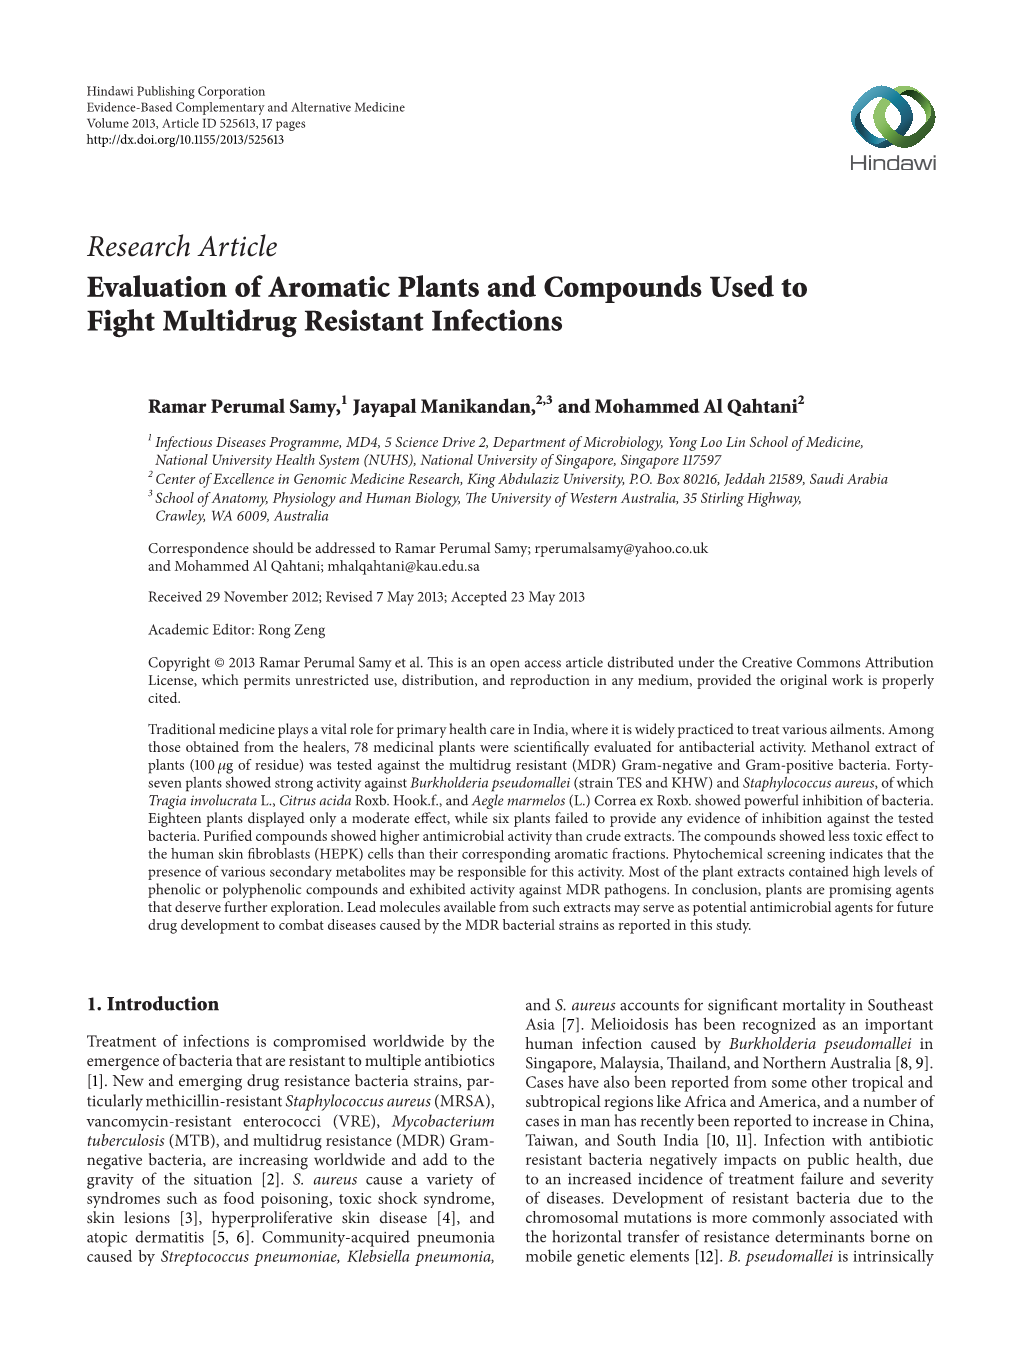 Evaluation of Aromatic Plants and Compounds Used to Fight Multidrug Resistant Infections